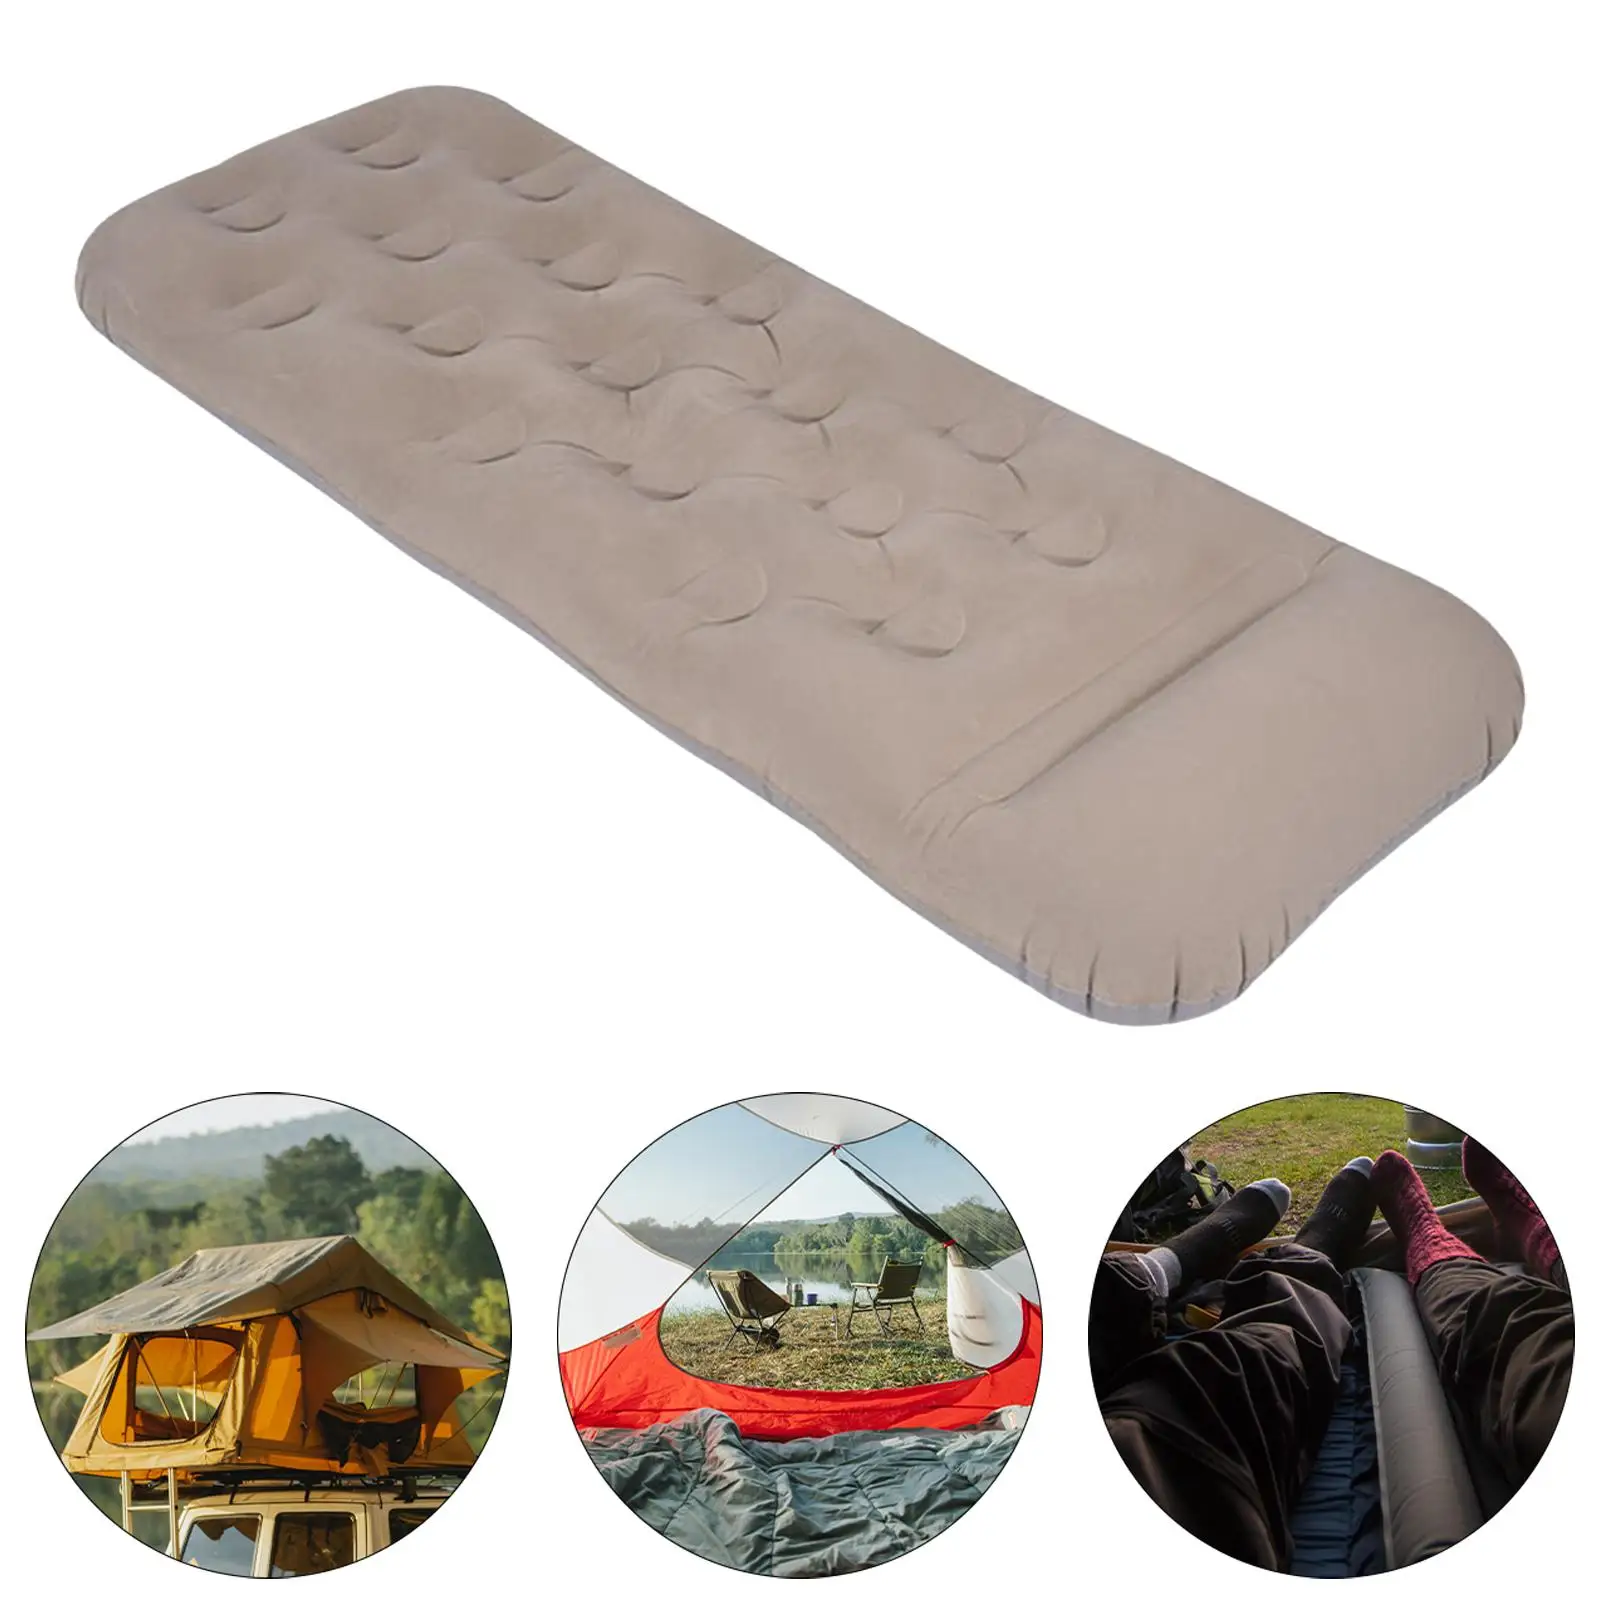 Camping Air Mattress Inflatable Mattress Inflatable Mat Air Bed for Indoor Outdoor